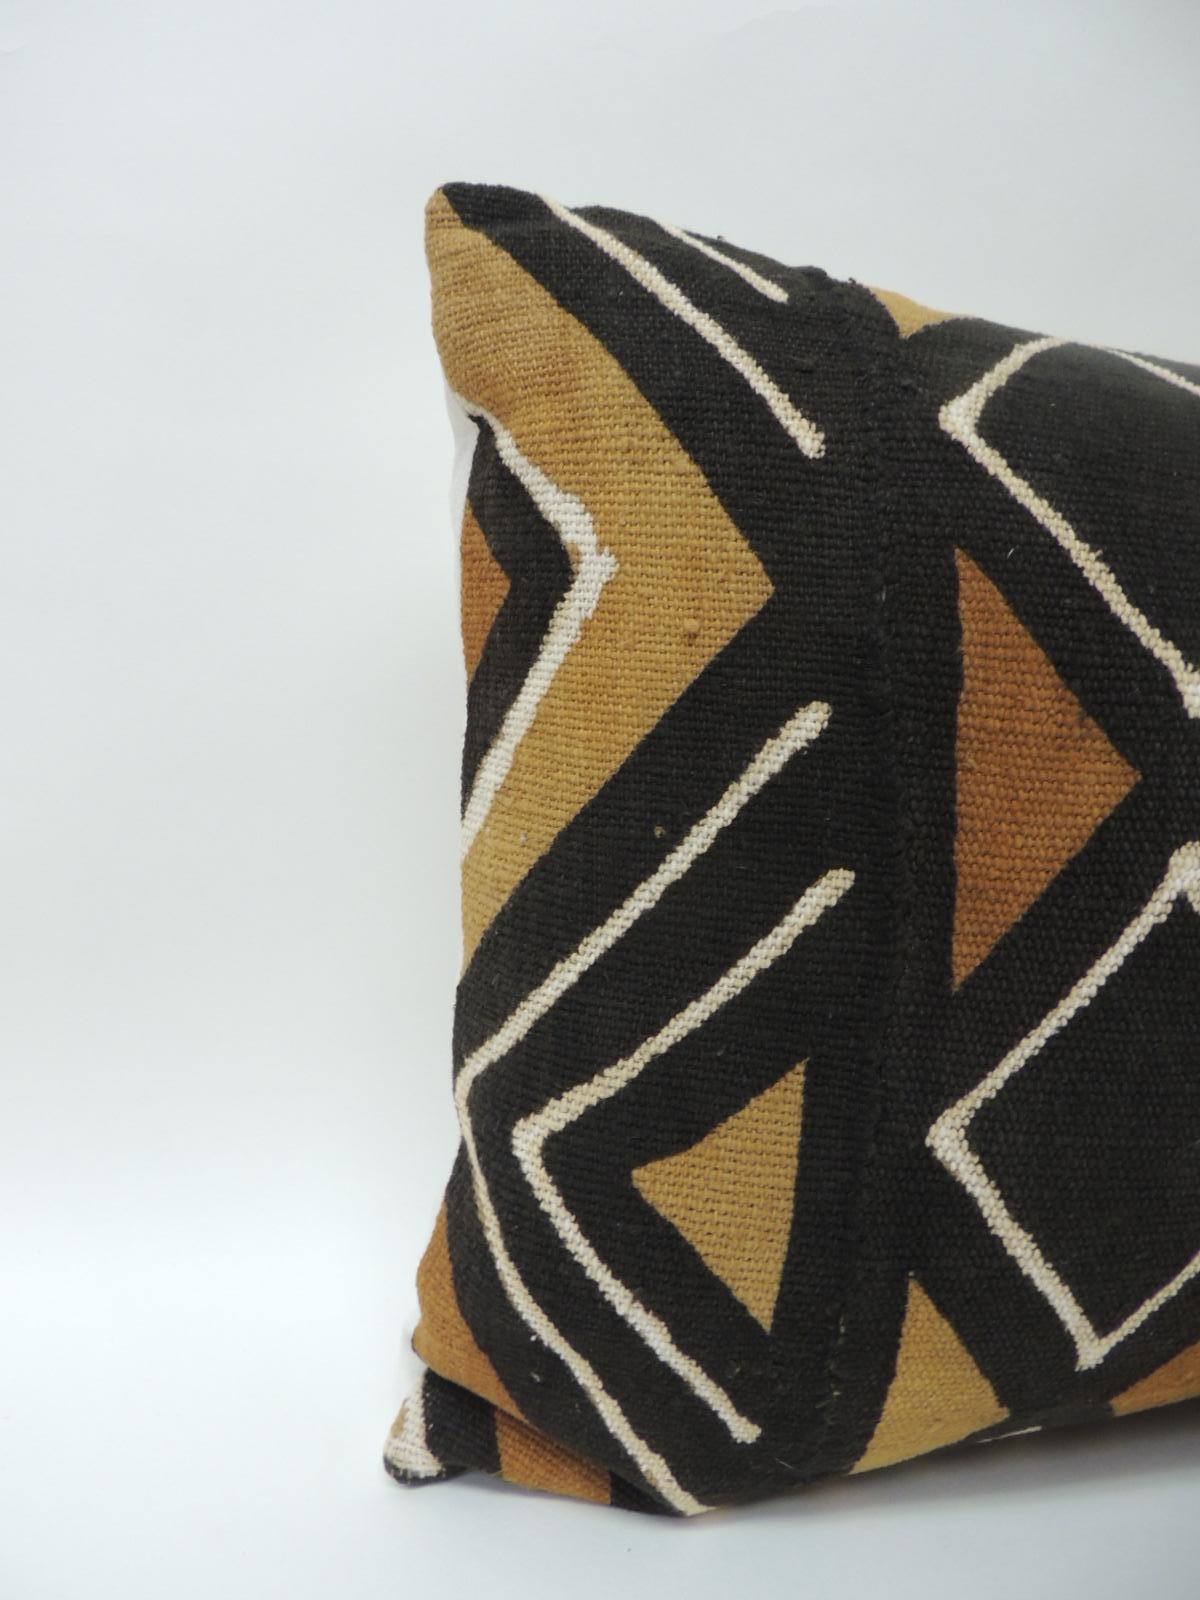 Vintage graphic African artisanal textile mudcloth decorative pillow, in shades of yellow, brown, black and natural linen backing. Decorative pillow handcrafted and designed in the USA. Closure by stitch (no zipper closure) with custom made pillow